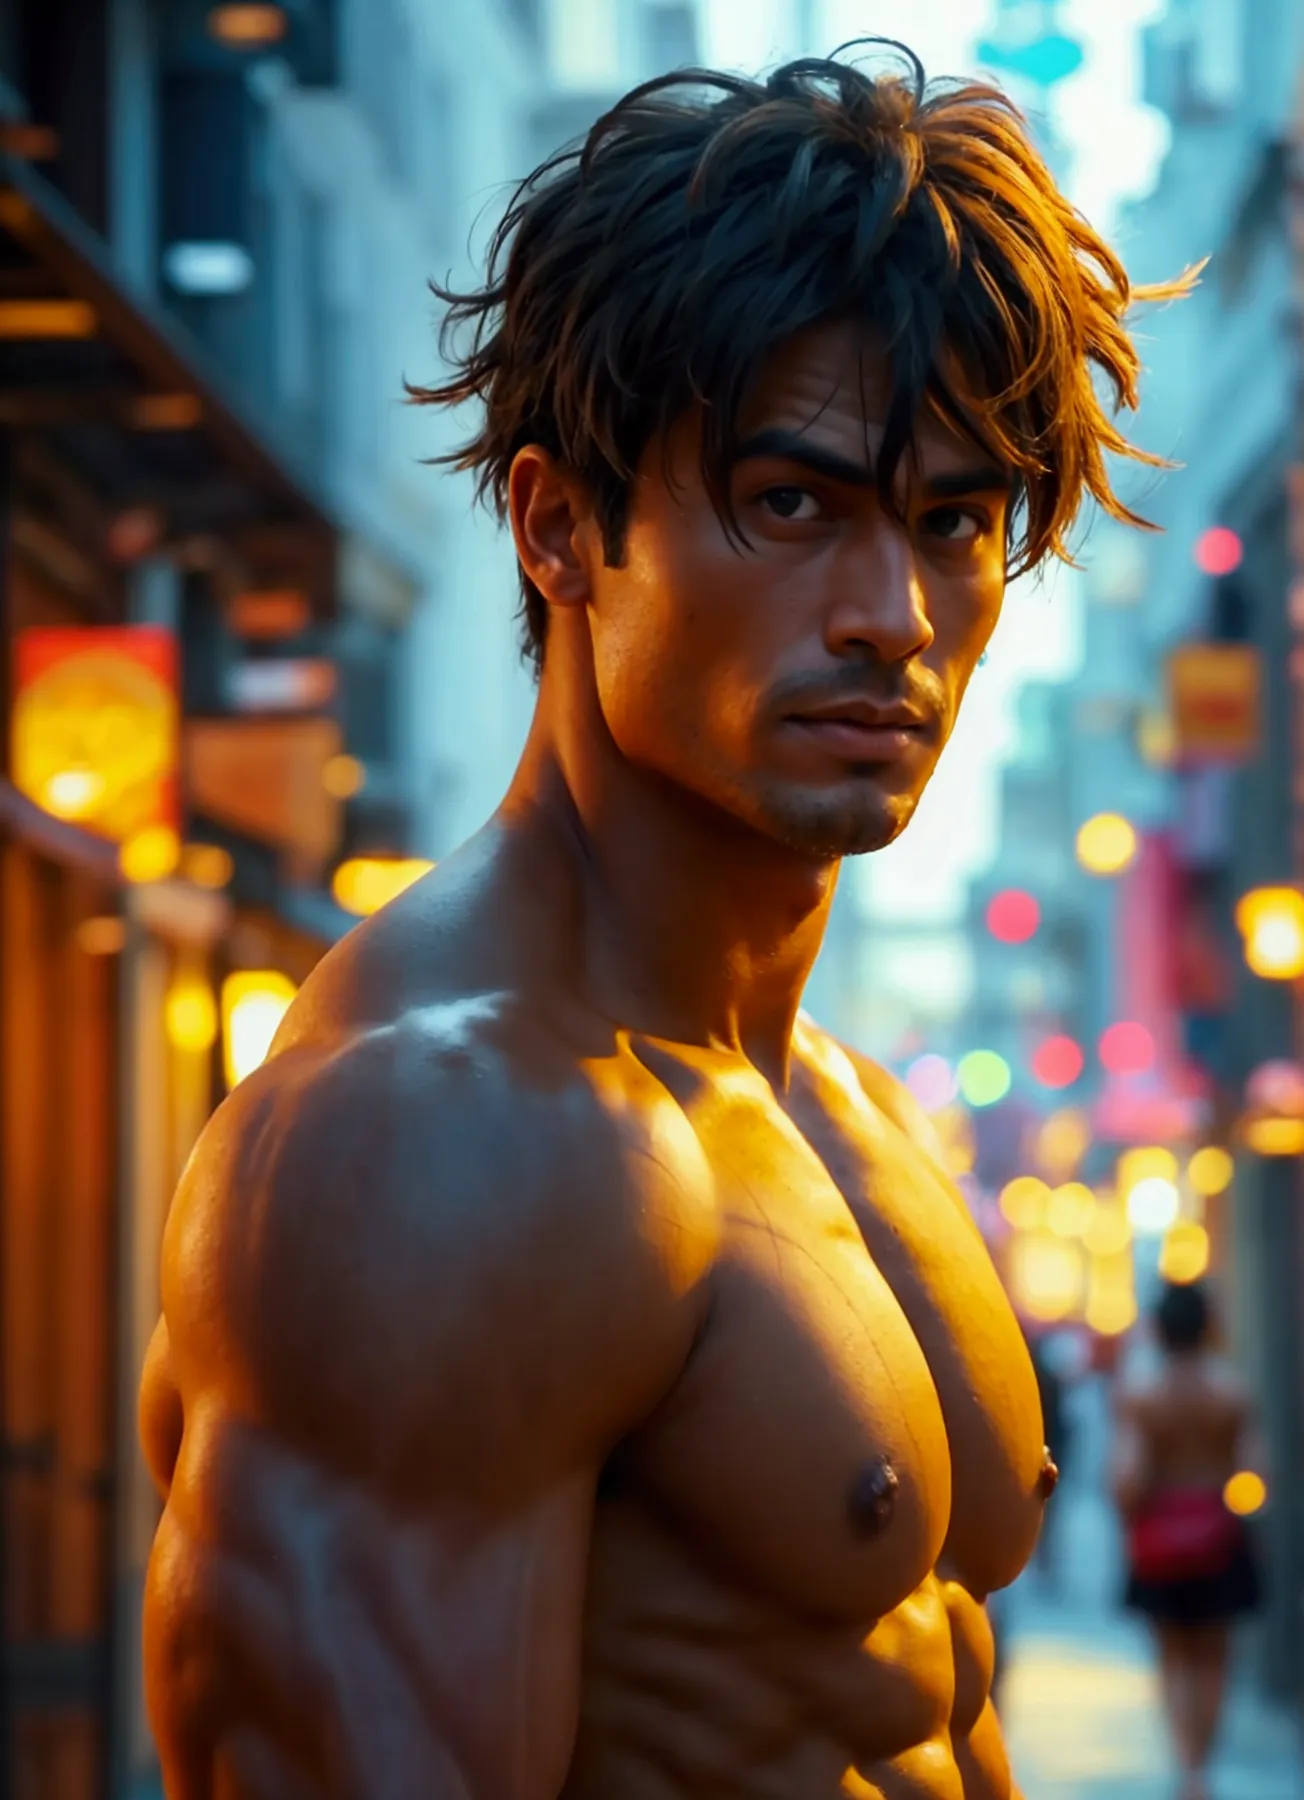 Create a hot strong man, tanned and naked on the street